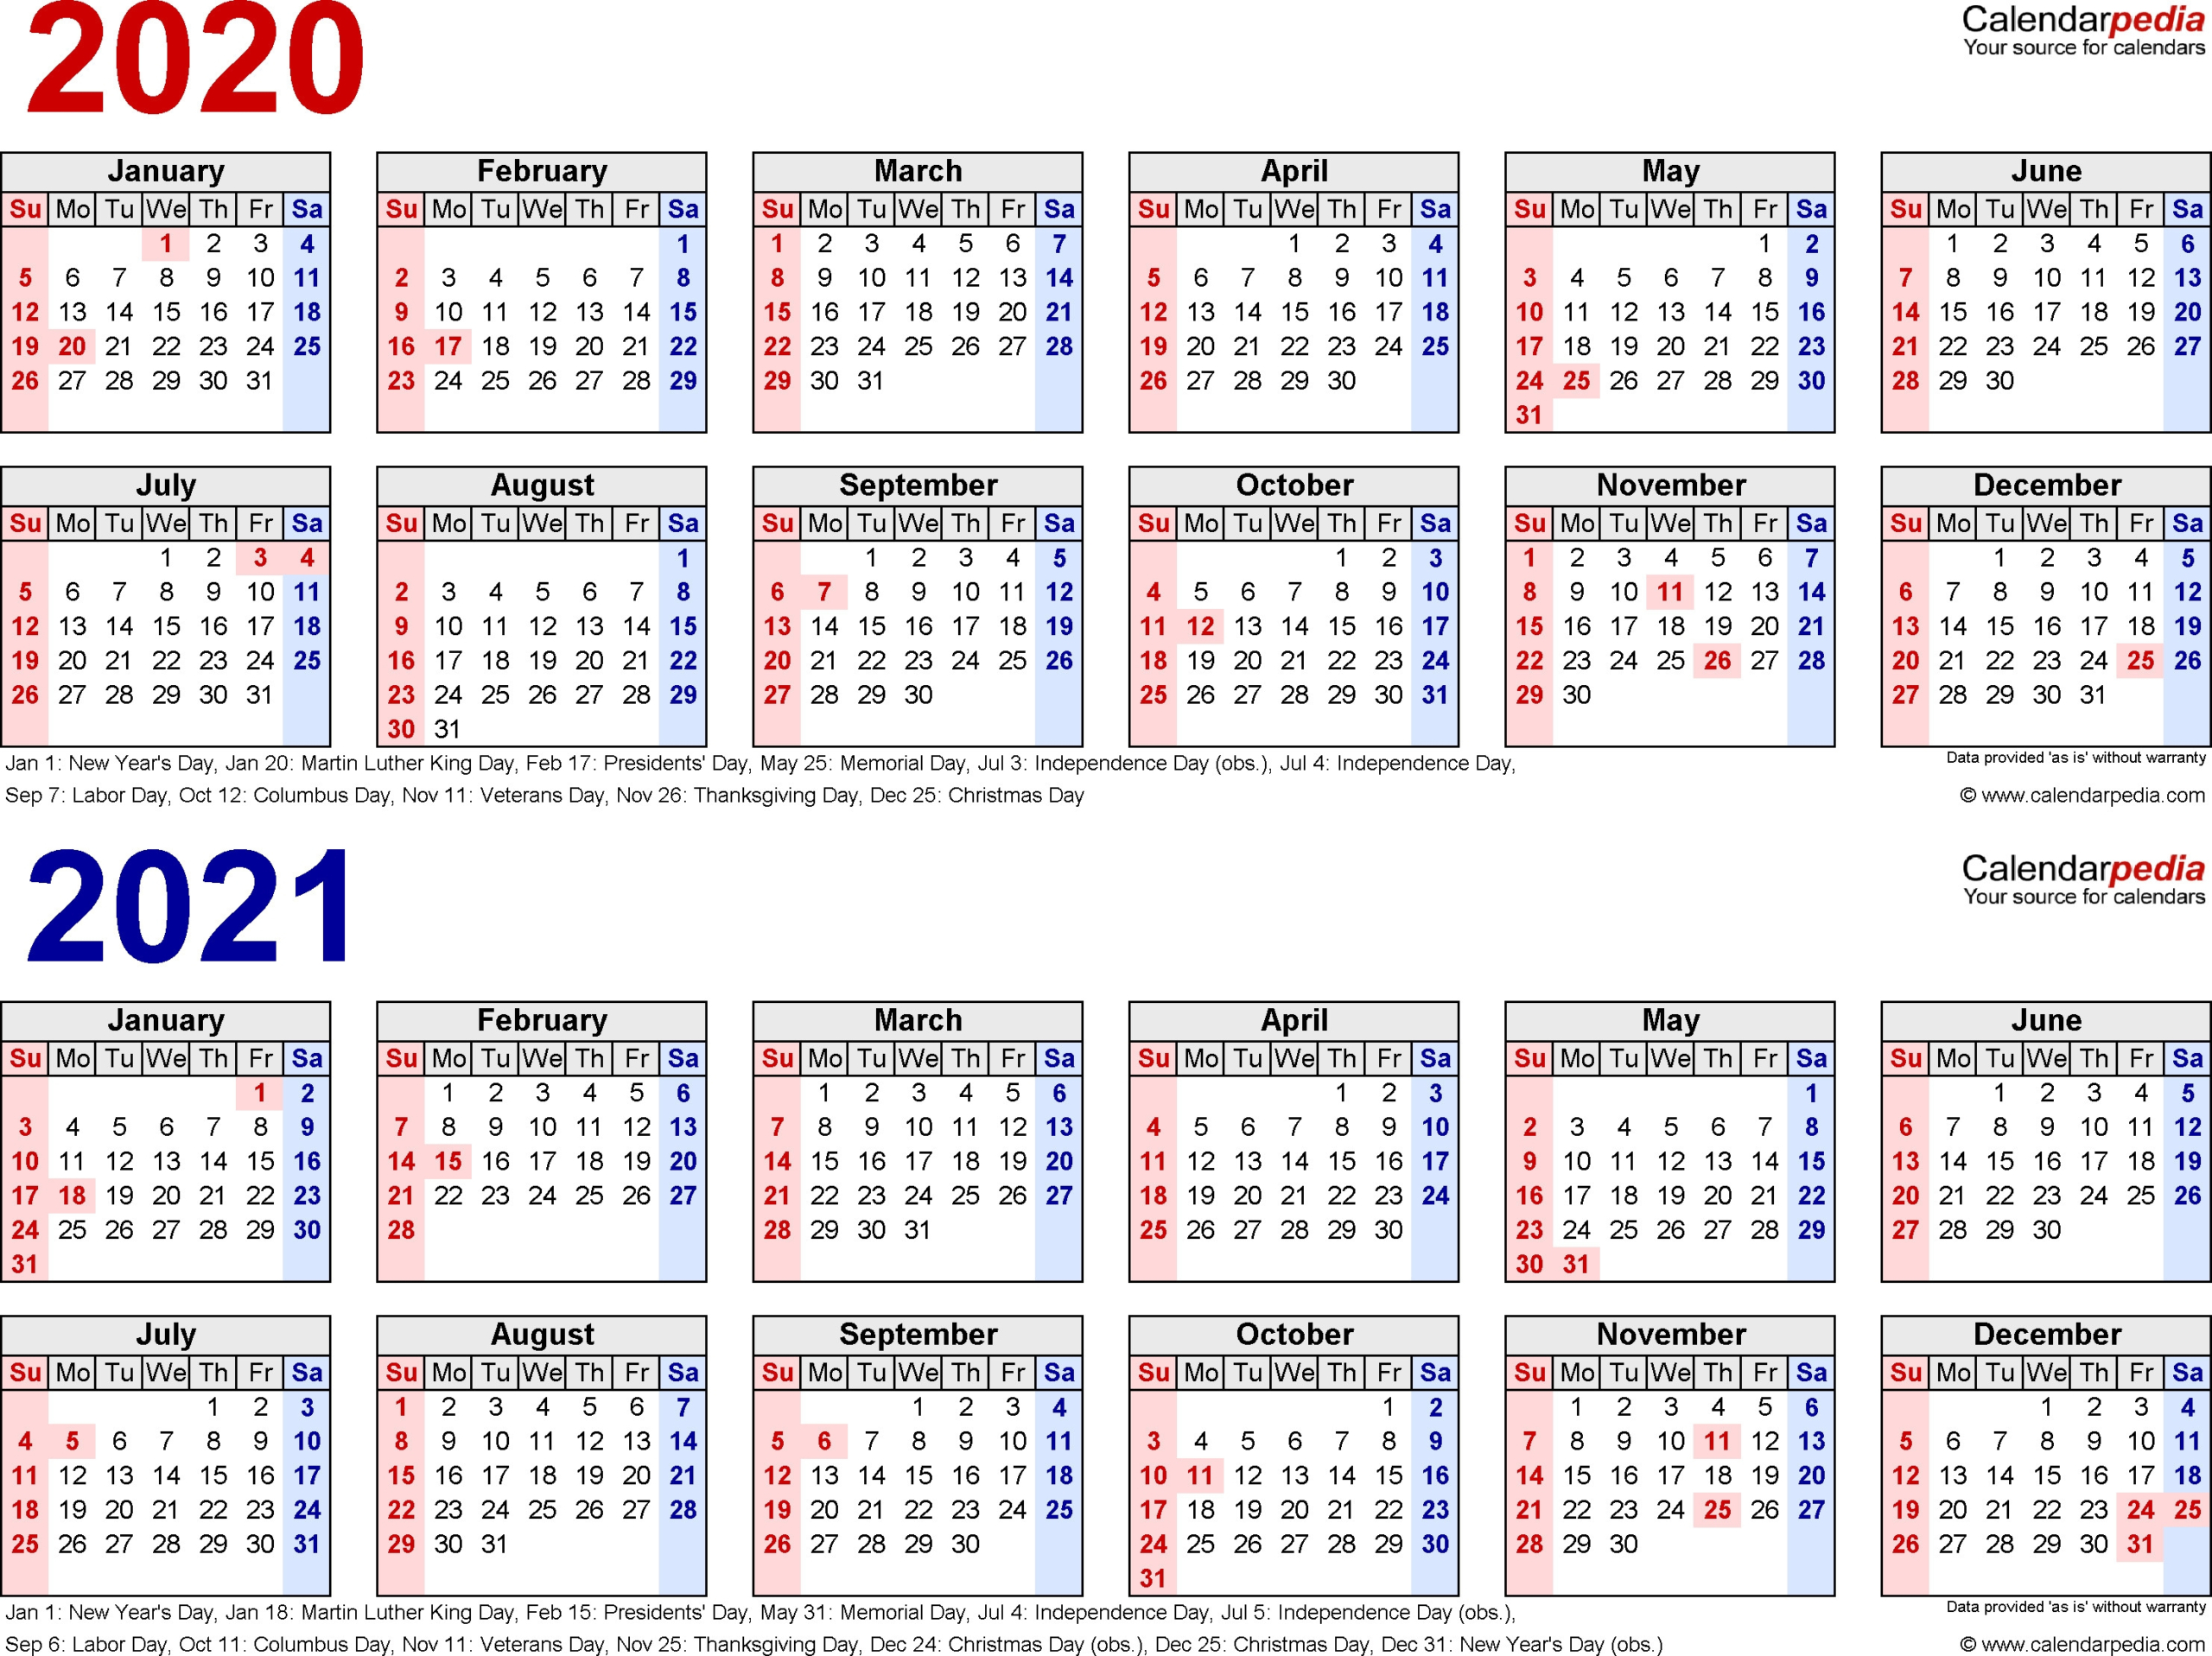 Depo Schedule For 2021 | Calendar Printables Free Blank